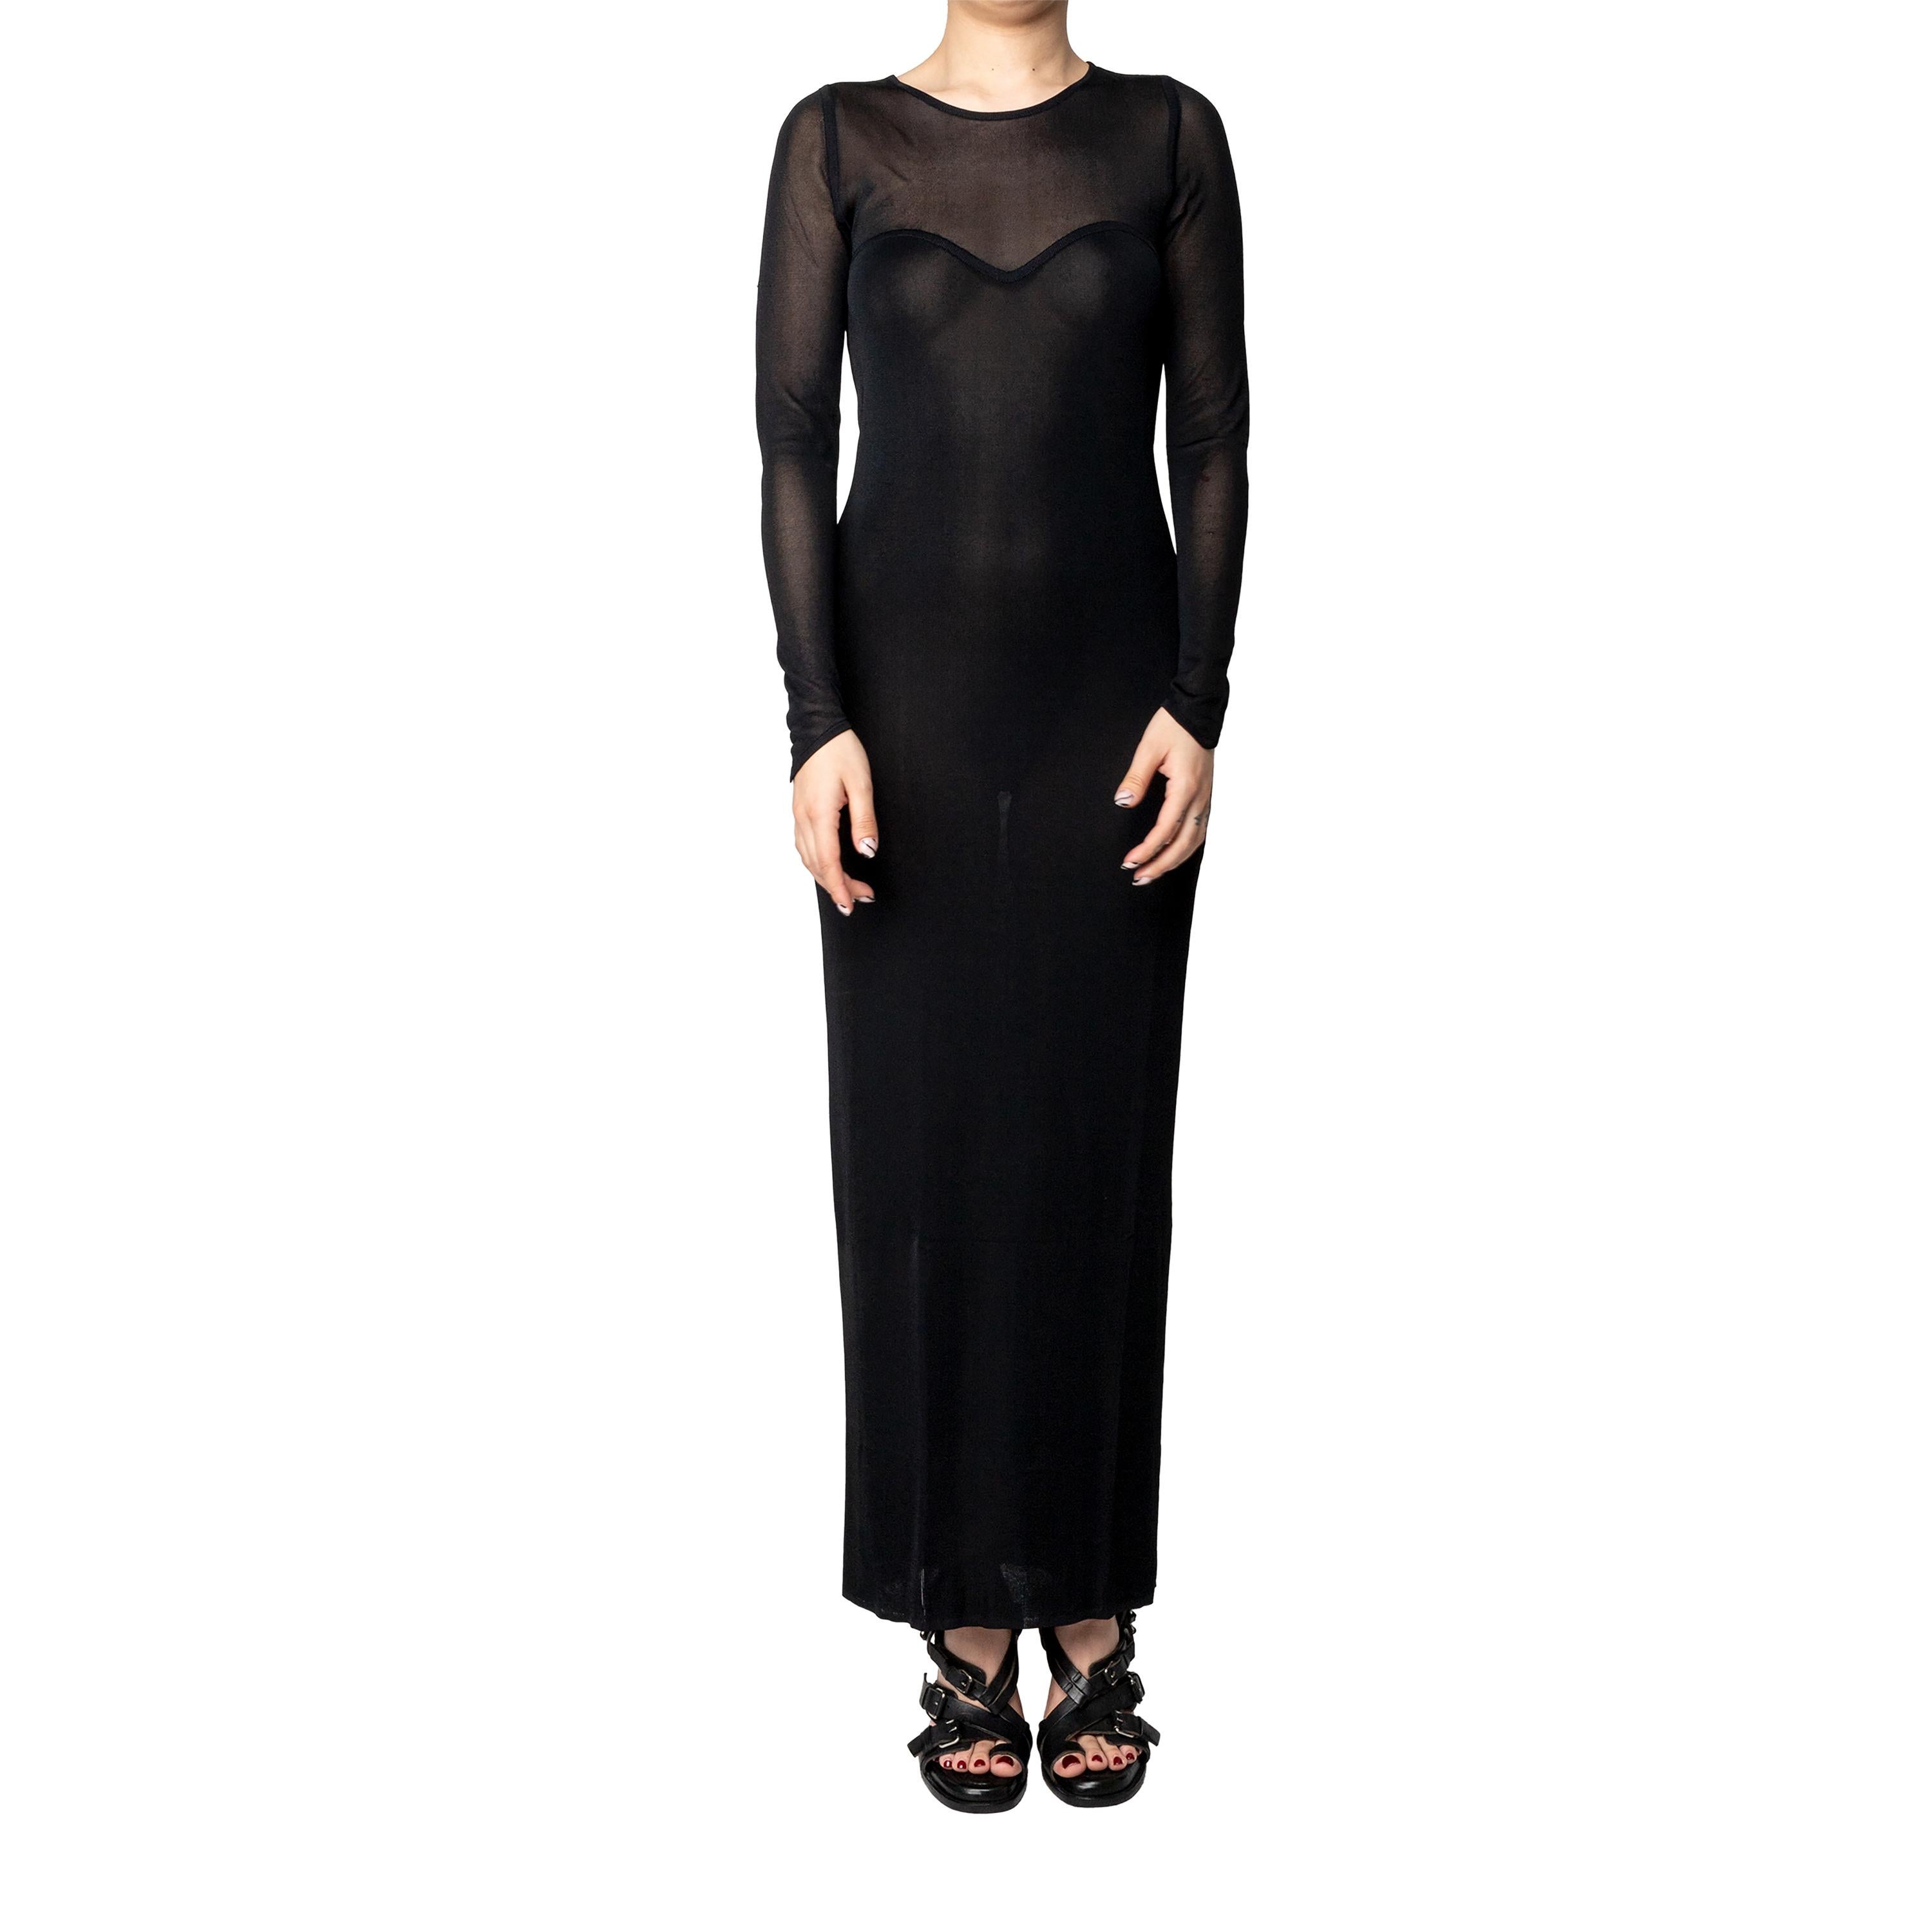 Introducing the Mugler Mesh Long Dress from the 90s. Crafted from high-quality viscose, this black body con dress is designed to hug your curves. The full sleeve and round crew neck add a touch of elegance, while the brand elements on the neckline